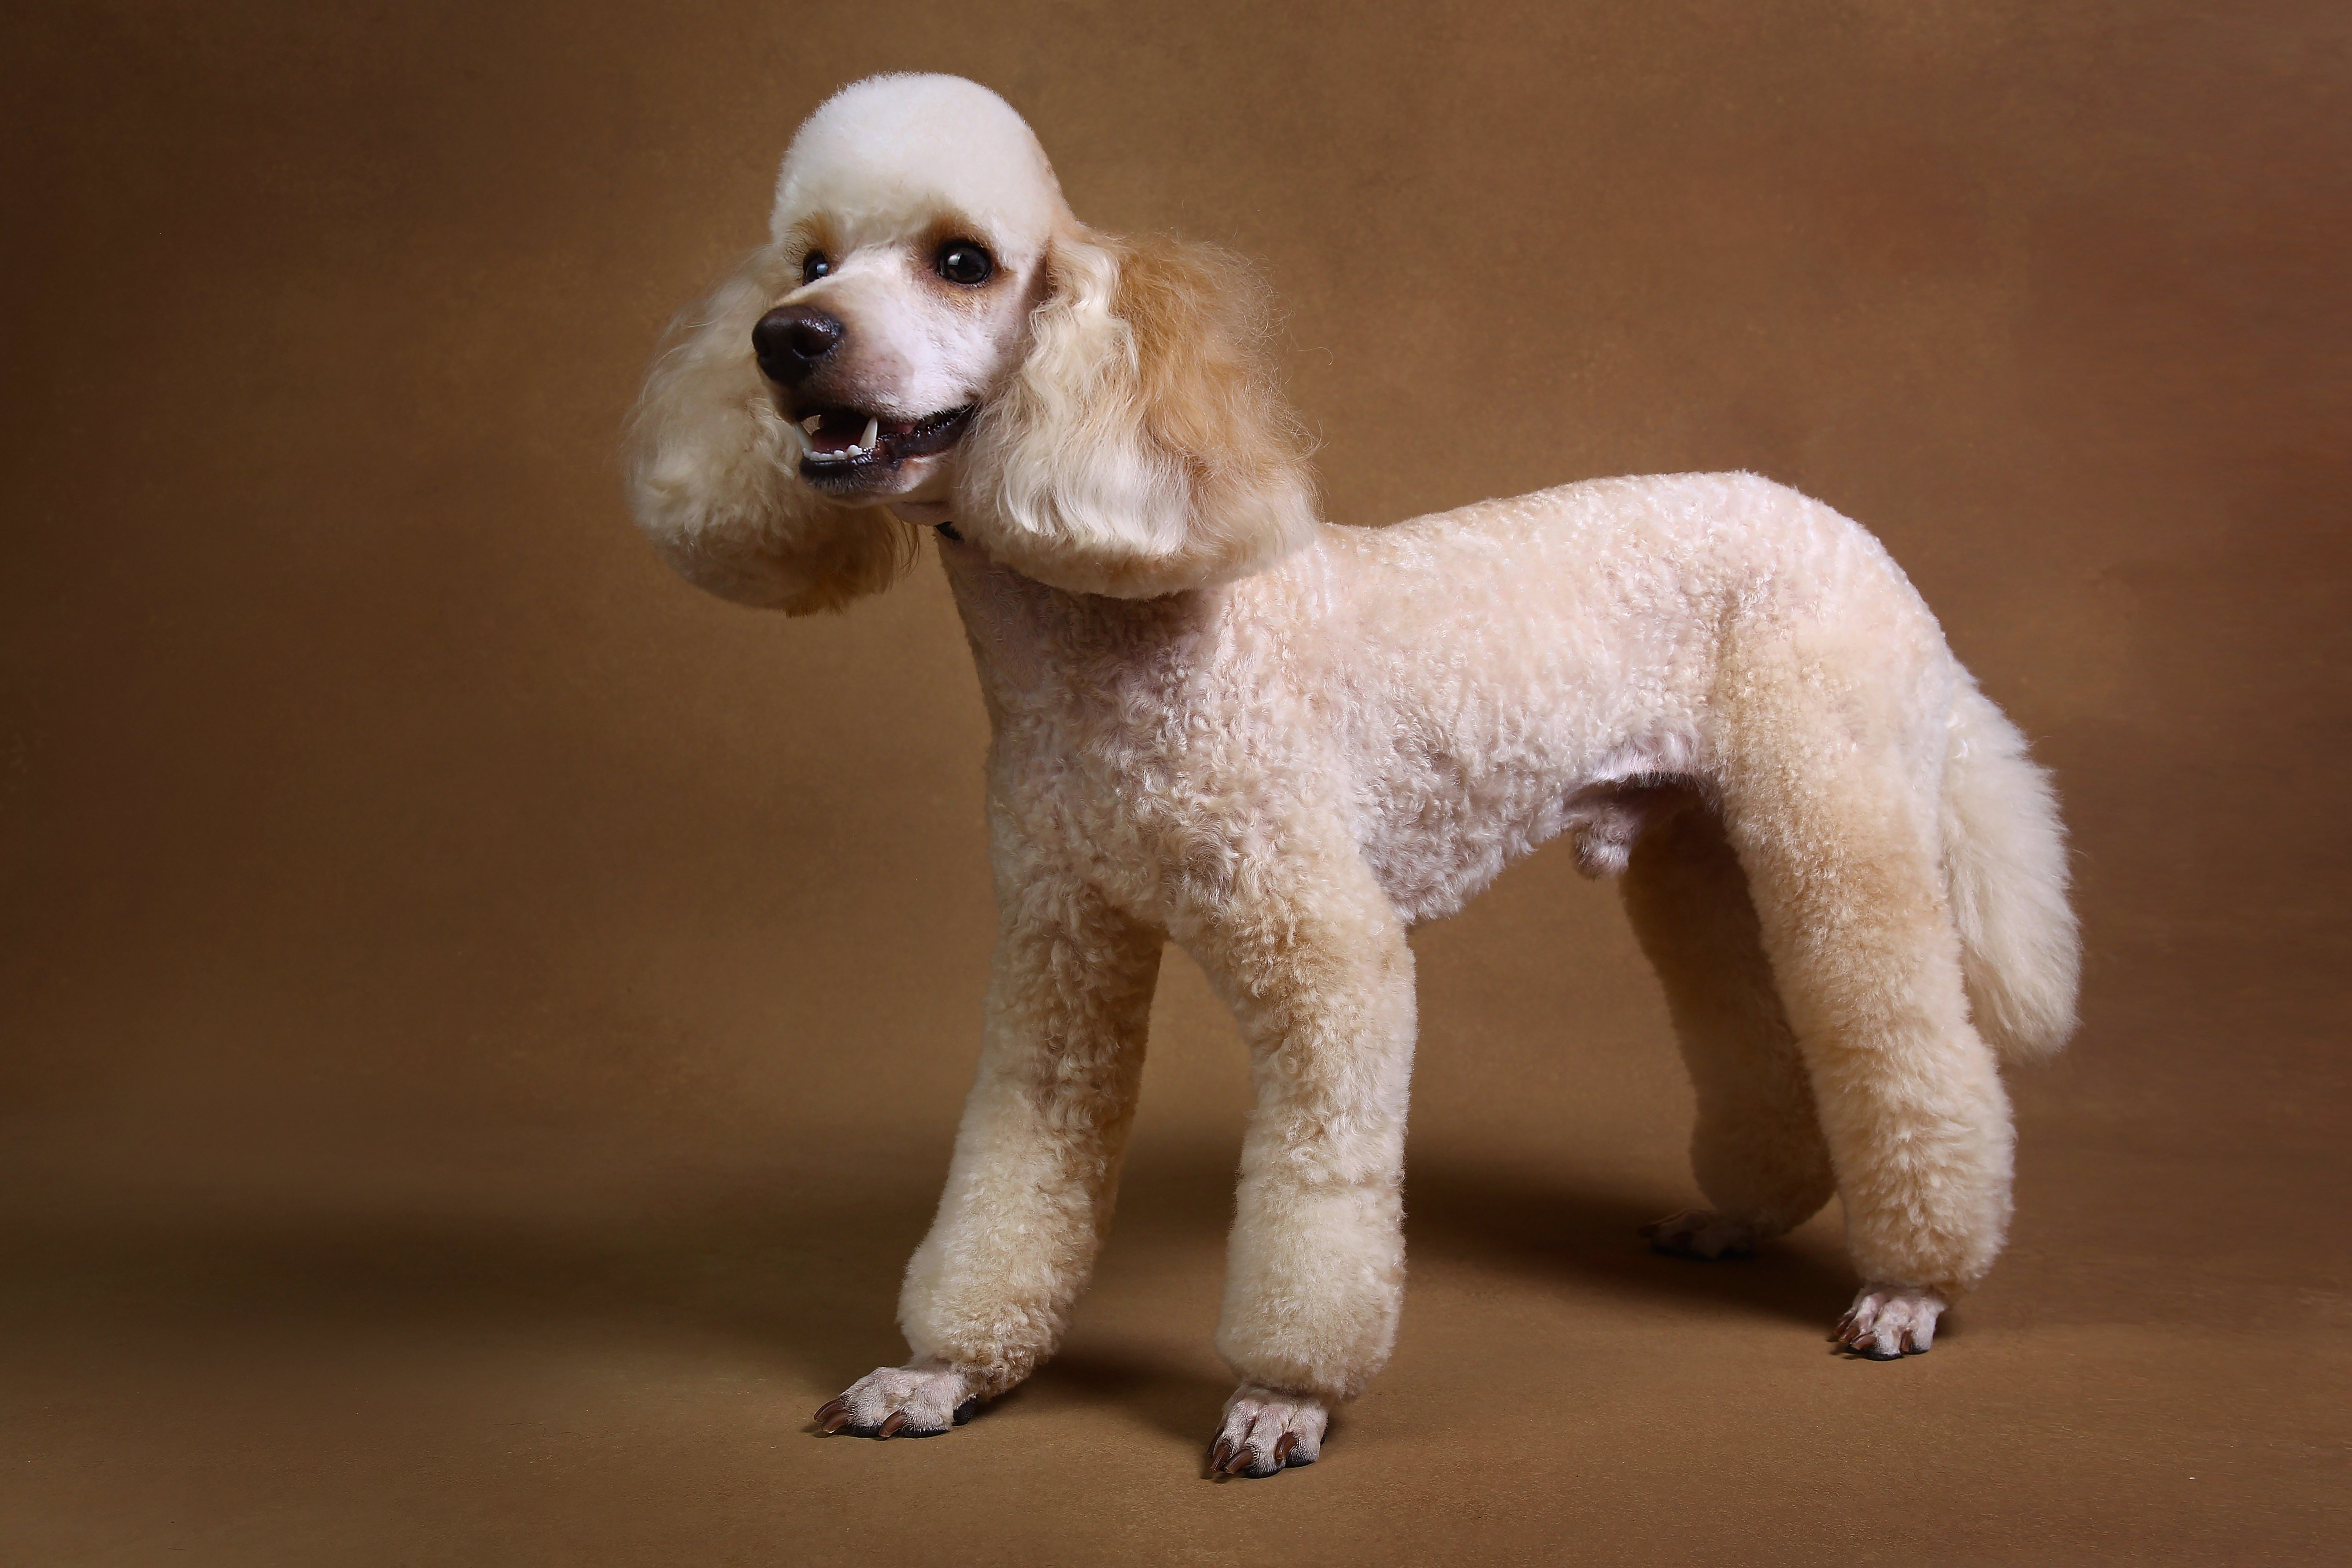 Poodles have curly hair